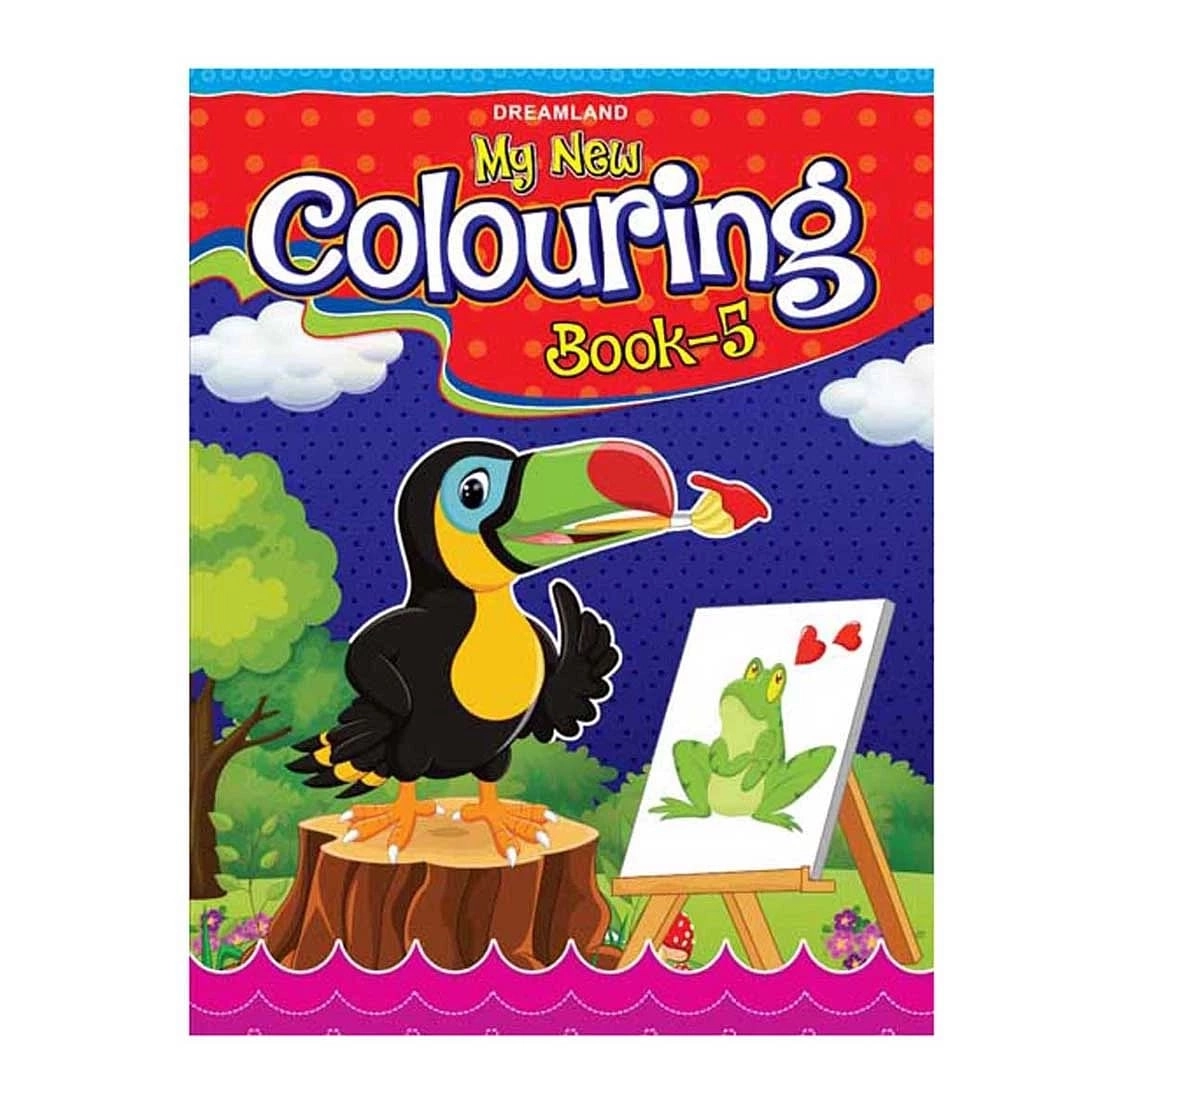 Dreamland Paper Back My New Colouring Book Part 5 for kids 3Y+, Multicolour